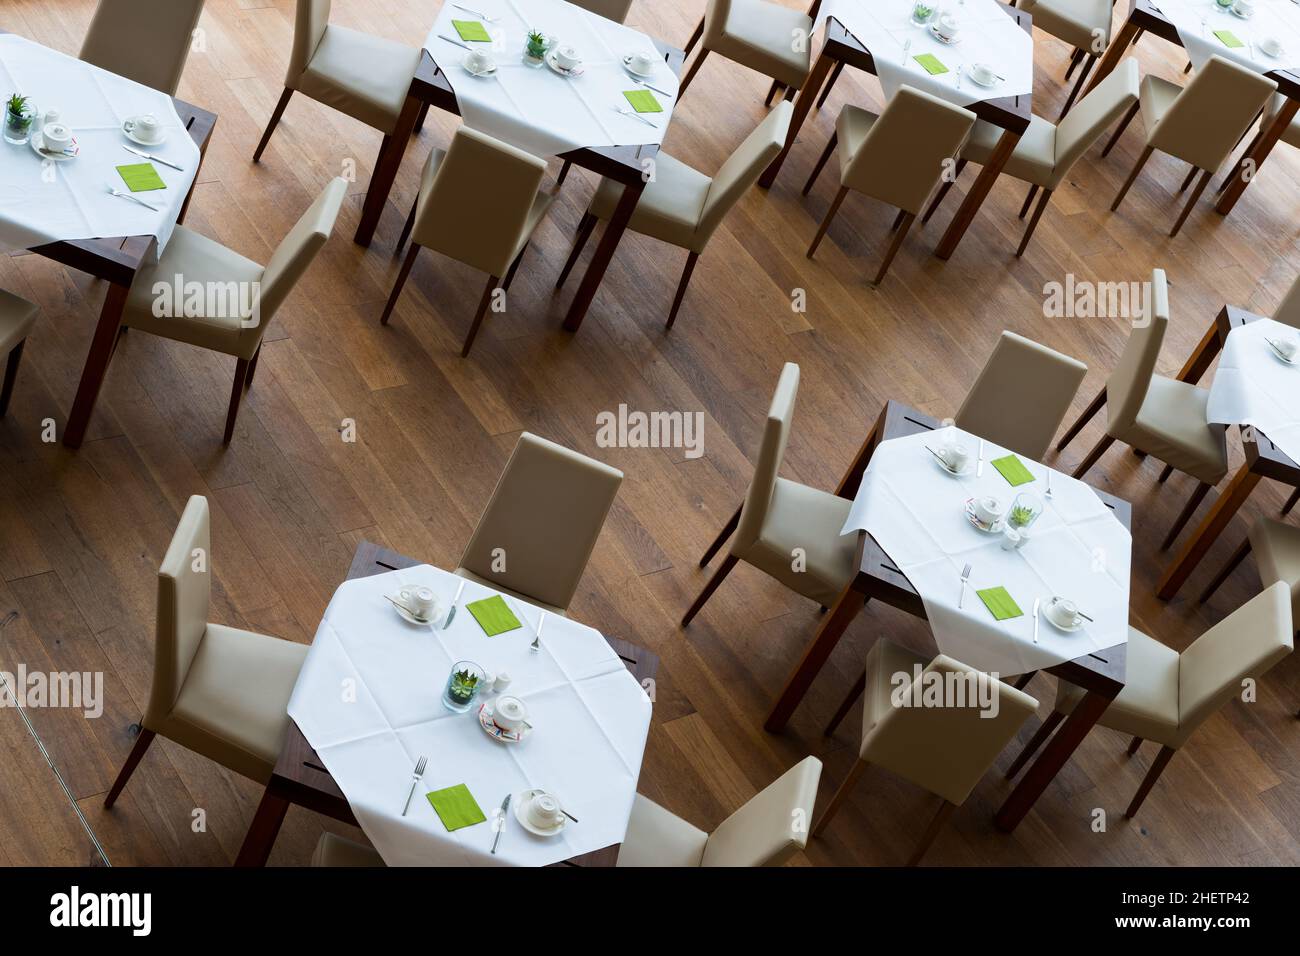 decorated tables and leather chairsn arranged on wooden floor Stock Photo